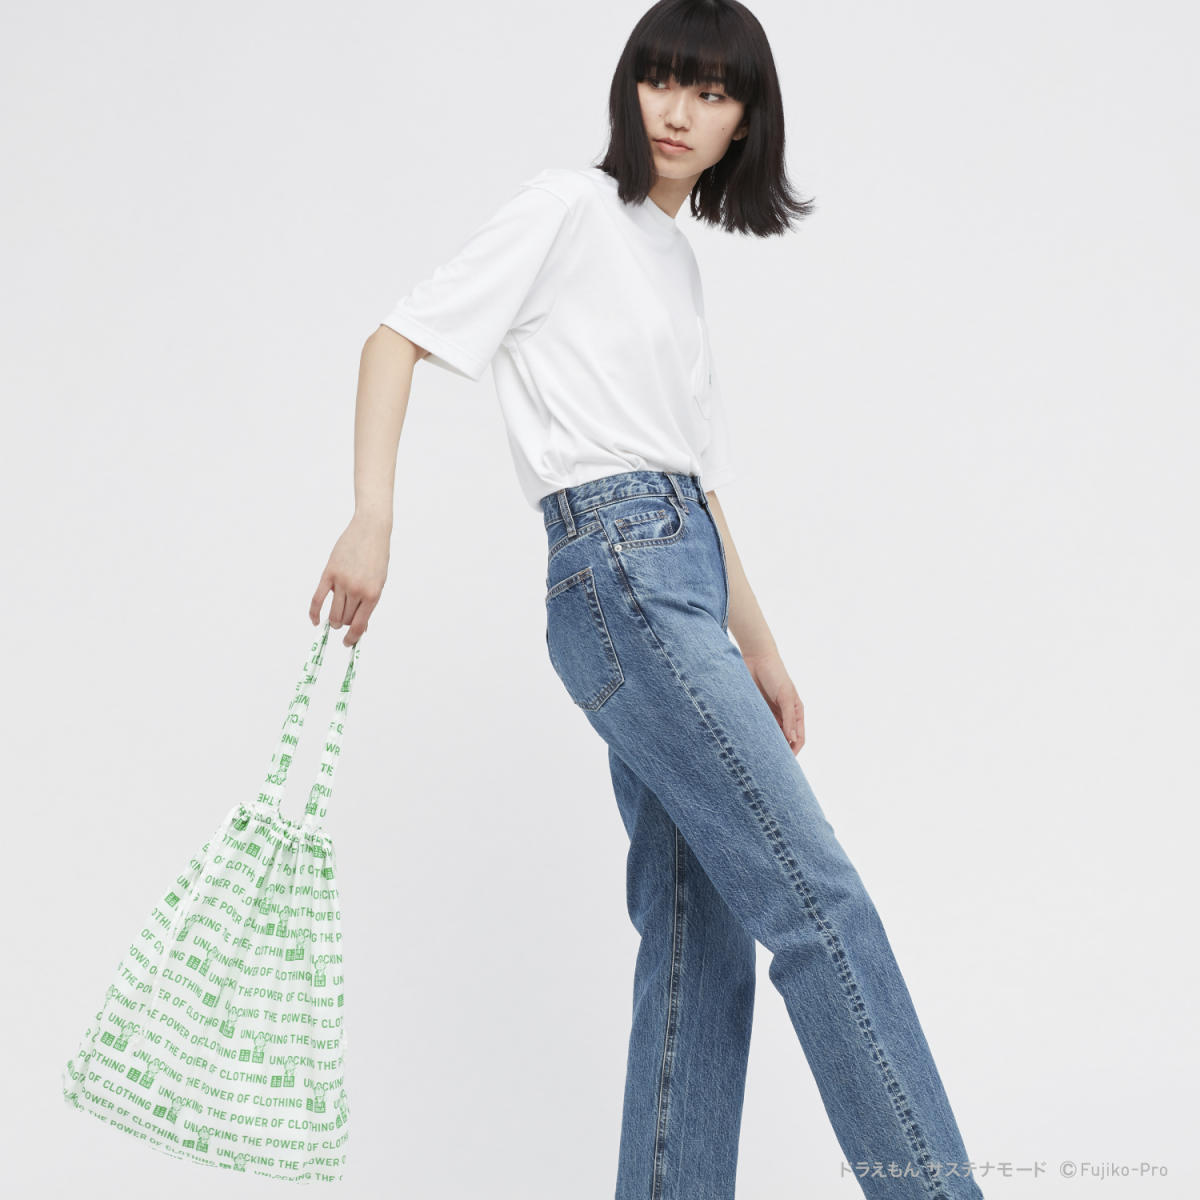 Uniqlo Inspires Environmental Action With New Campaign